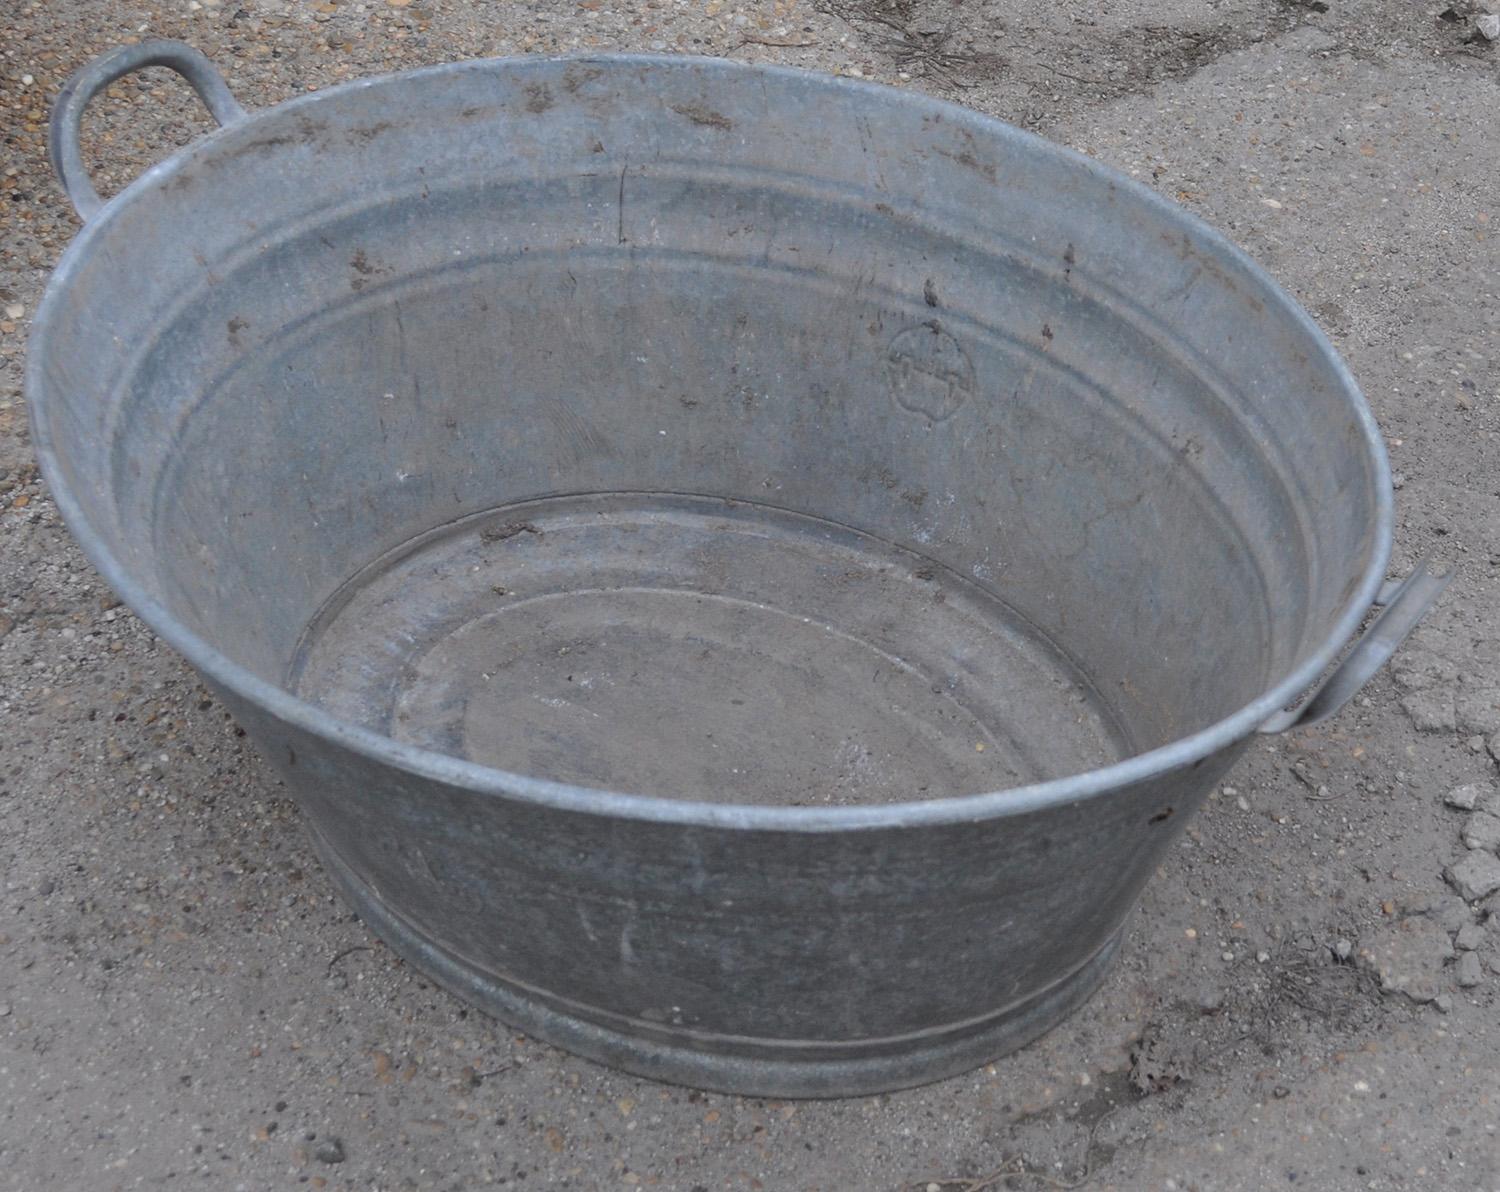 Zinc tub from Hungary
Double-handled zinc tub found in Hungary
Color: Silver patina galvanized
Materials: Metal/zinc
Condition: Very good; vintage patina, used
Measures: Length (Depth) 23.23 in
Width 31.5 in
Height 14.17 in.